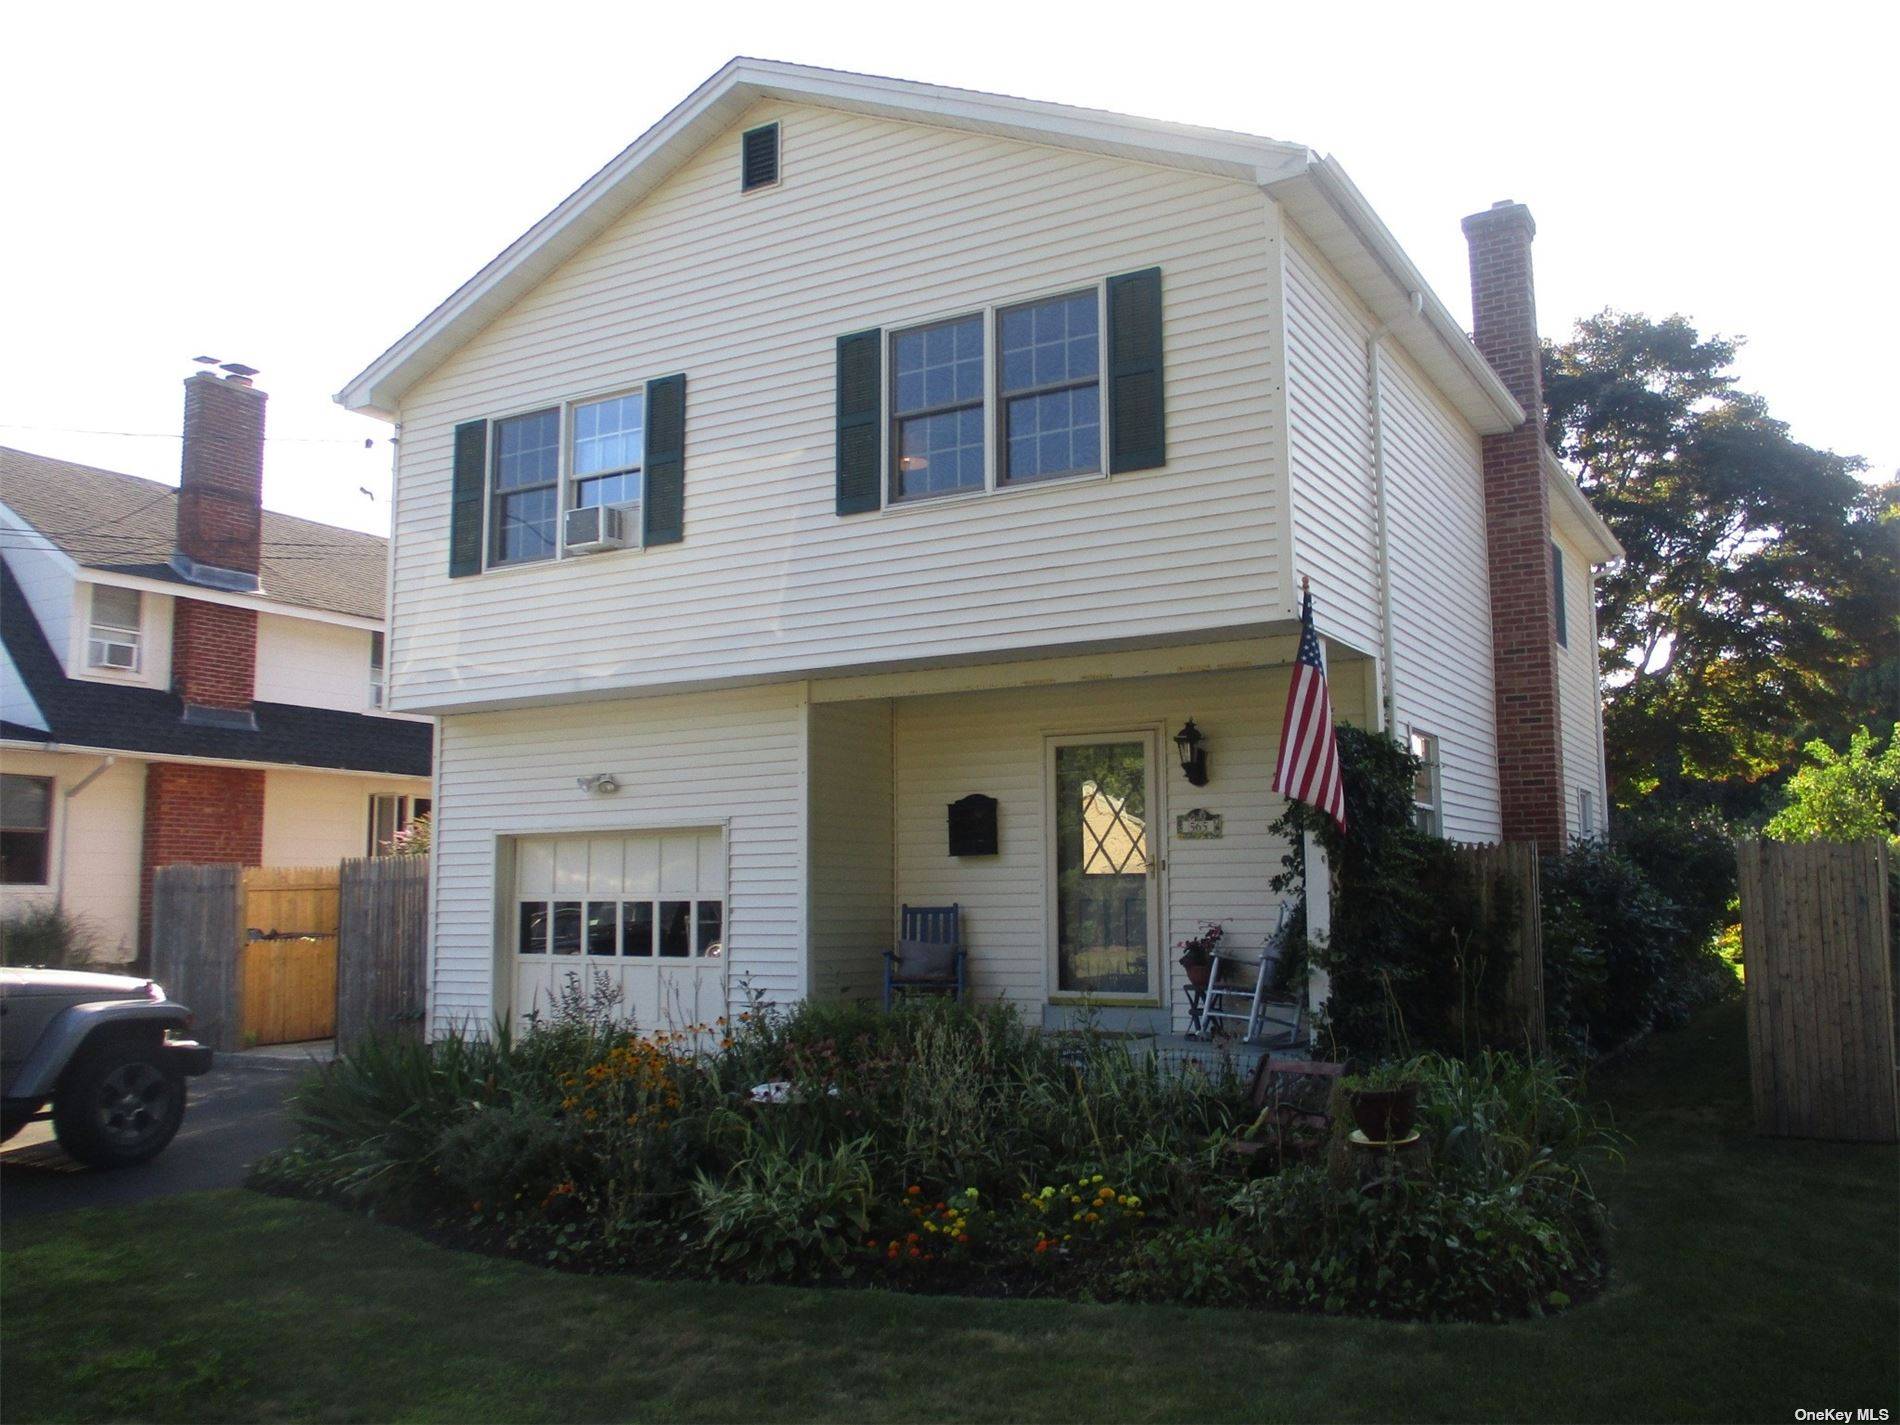 Lovely two story home located in a serene Mattituck neighborhood close to Love Lane, wineries, north fork shopping, schools and restaurants.